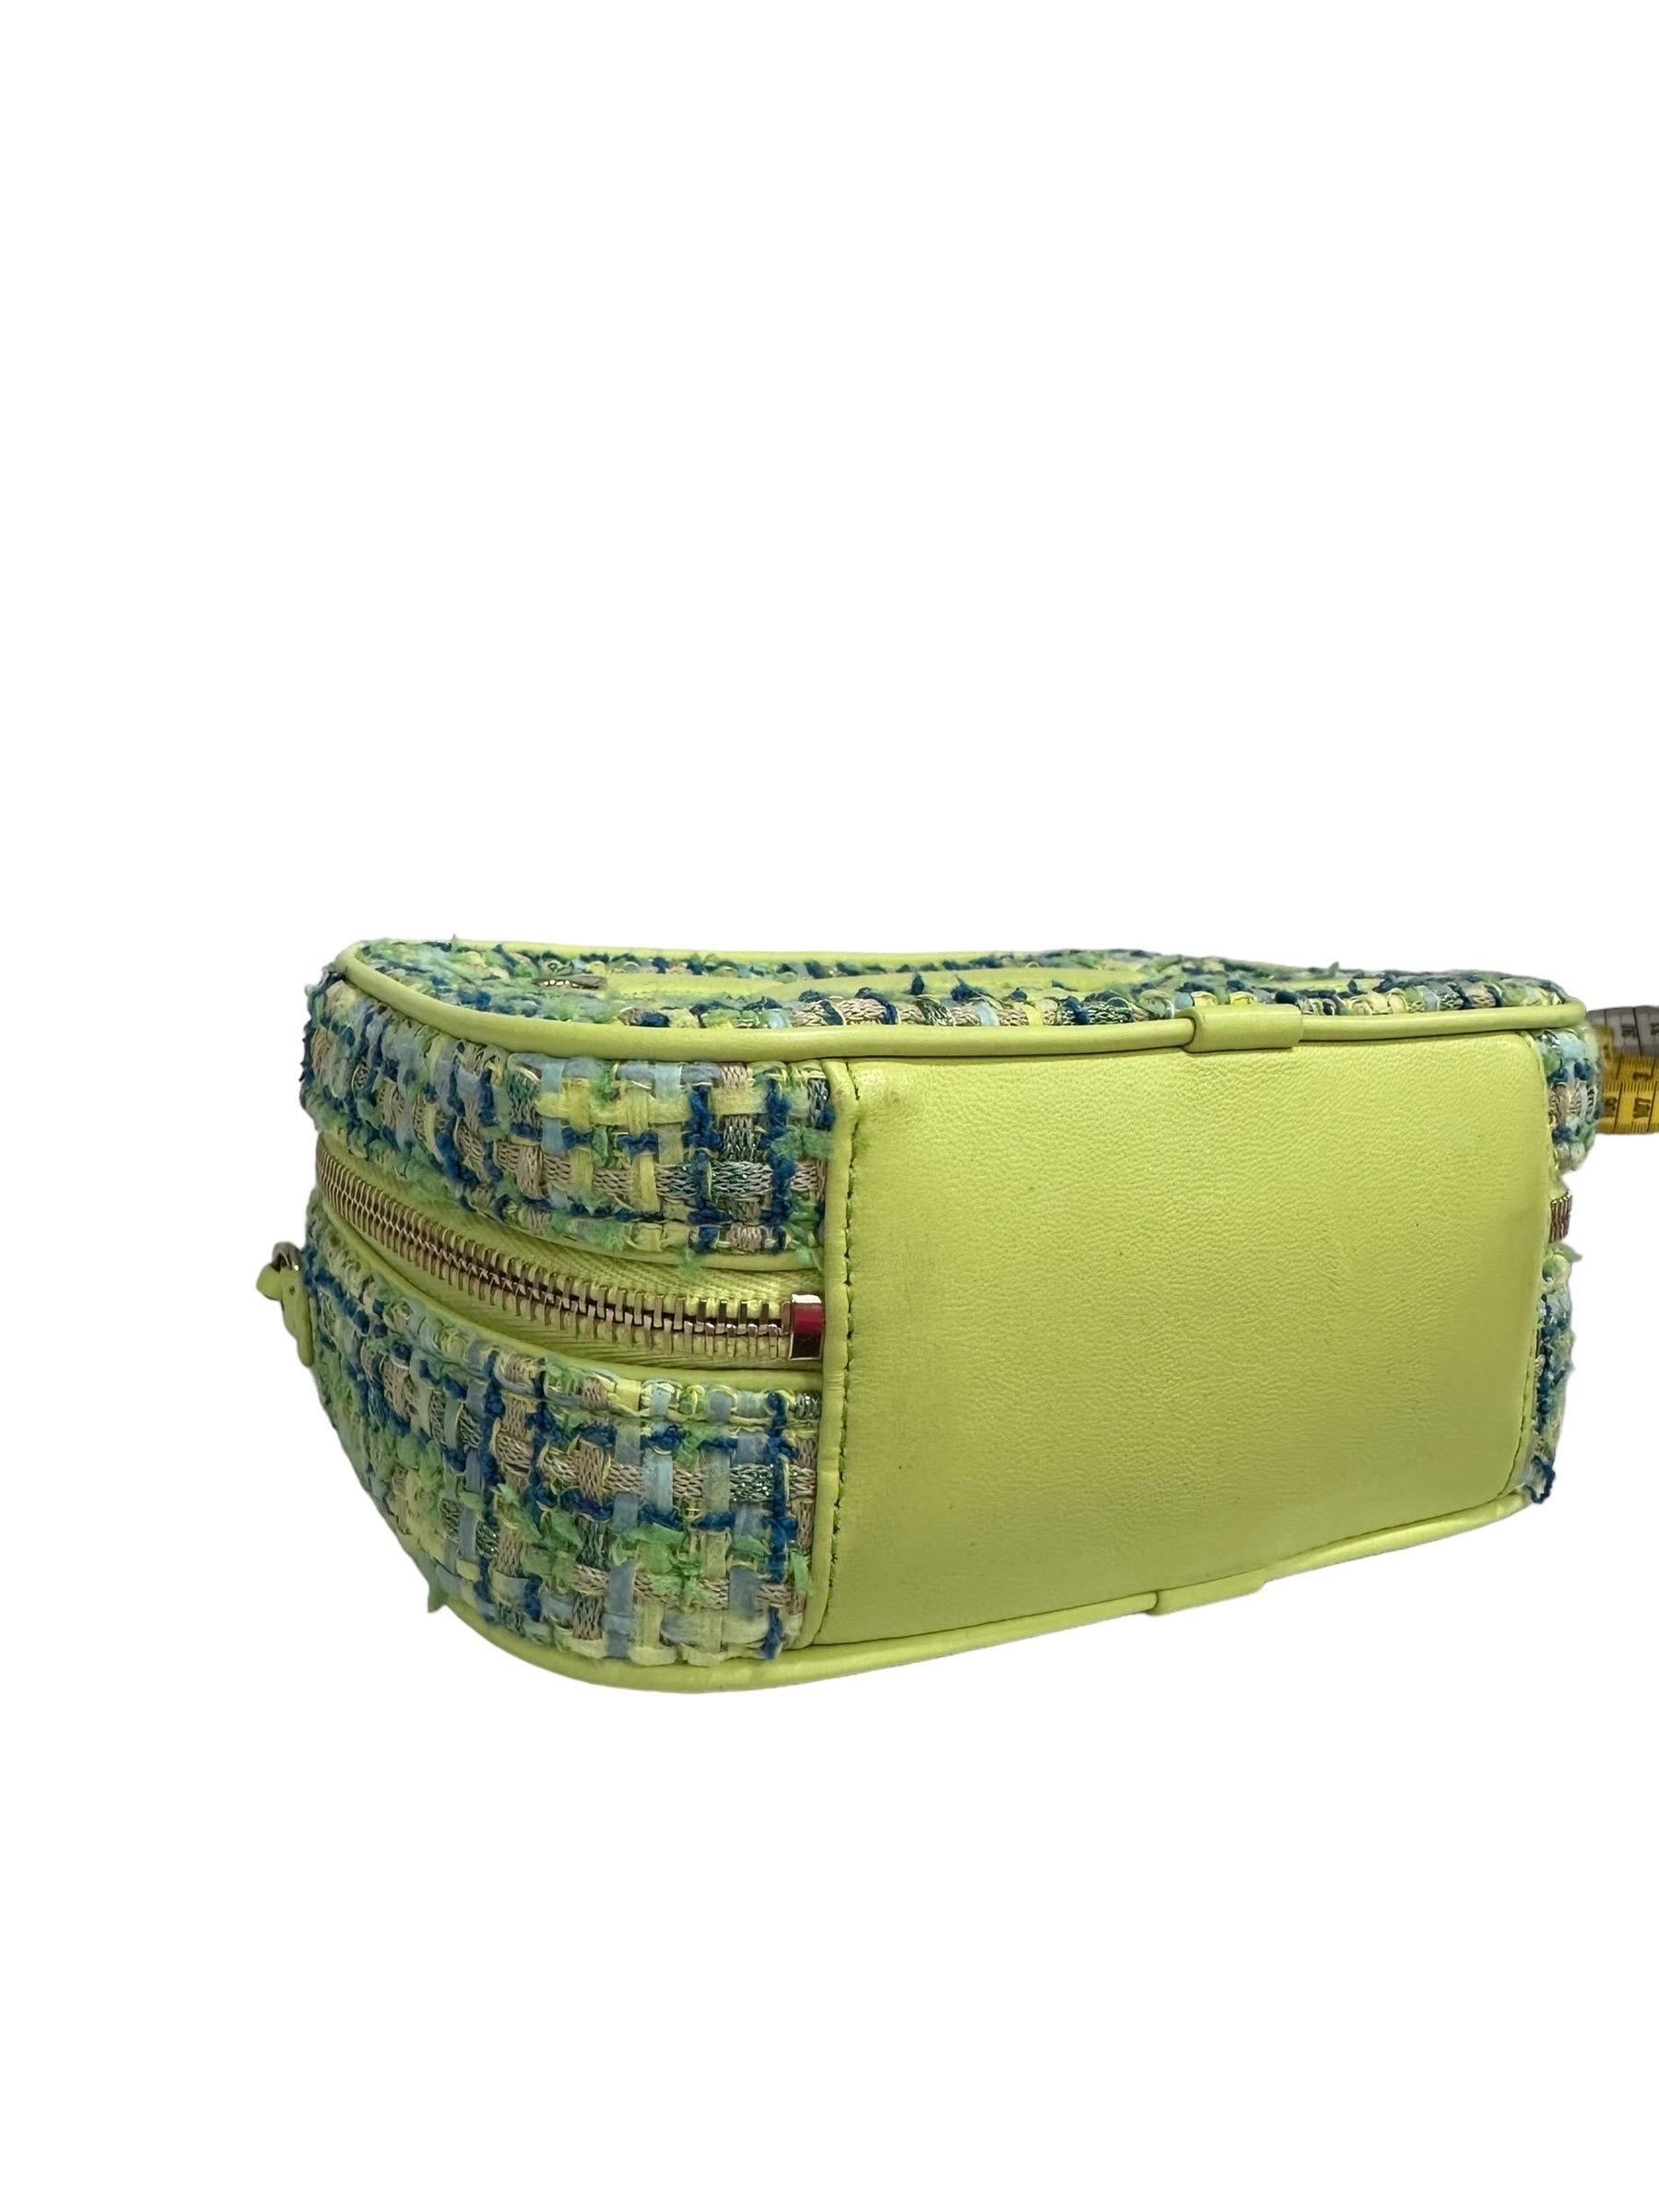 Borsa A Tracolla Chanel Camera Bag Tweed Lime 2019 For Sale 9